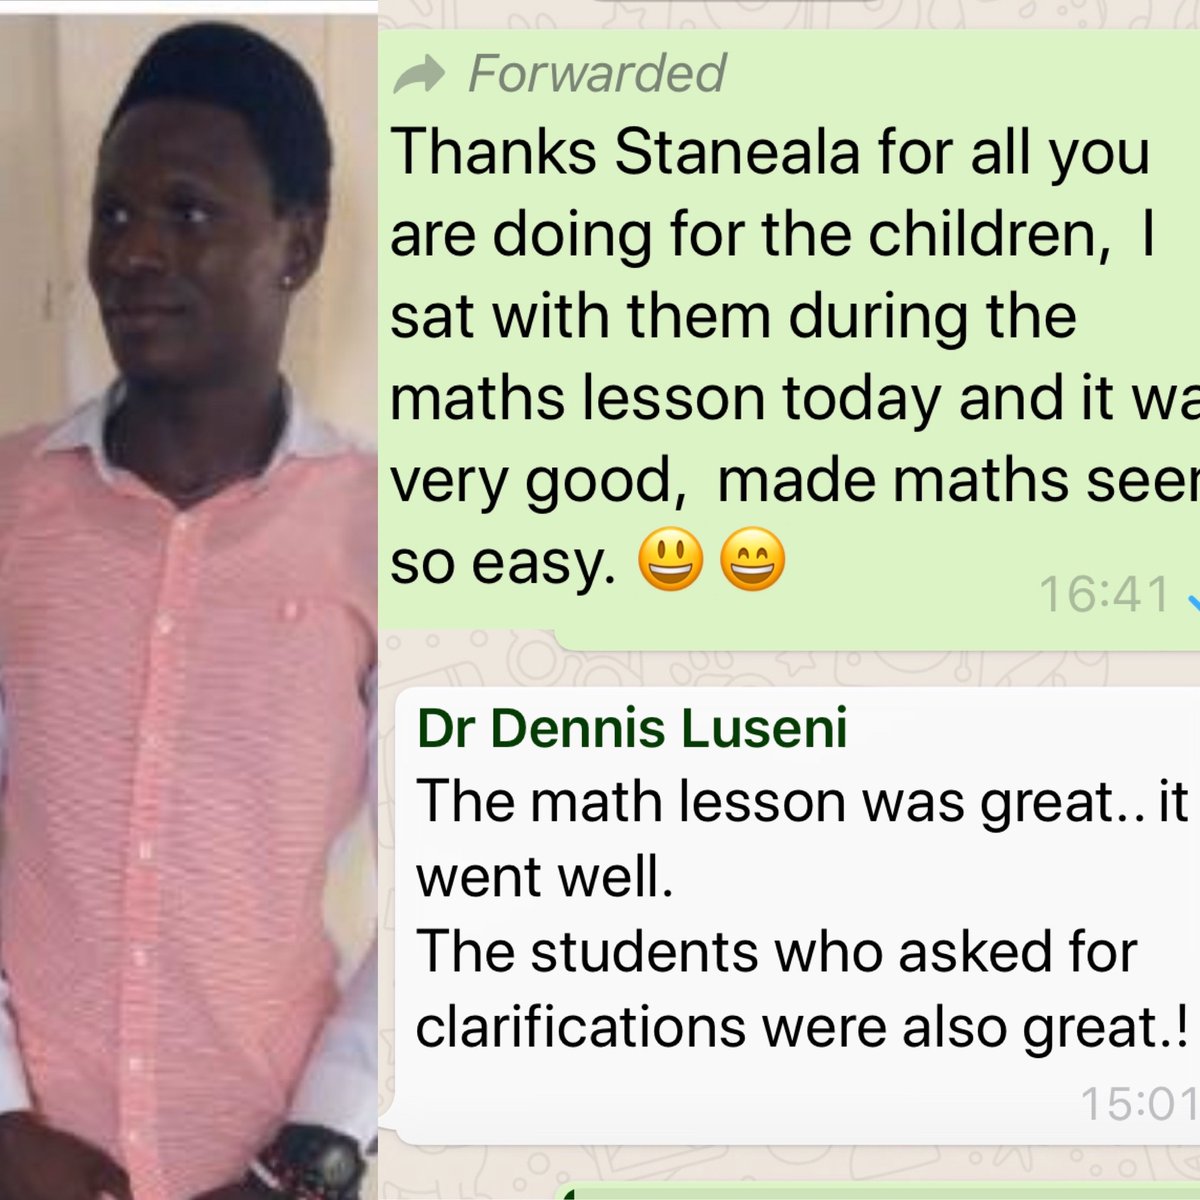 Go #TeamEducAid Big congratulations to John F (Senior Maths Teacher! 😊)  who contributed on day 1 of MBSSE & TSC #radiolessons & was congratulated all round for excellent #maths teaching #SierraLeone #CoronaResponse #EducAidIsTheAnswer #KeepSierraLeoneanStudentsLearning